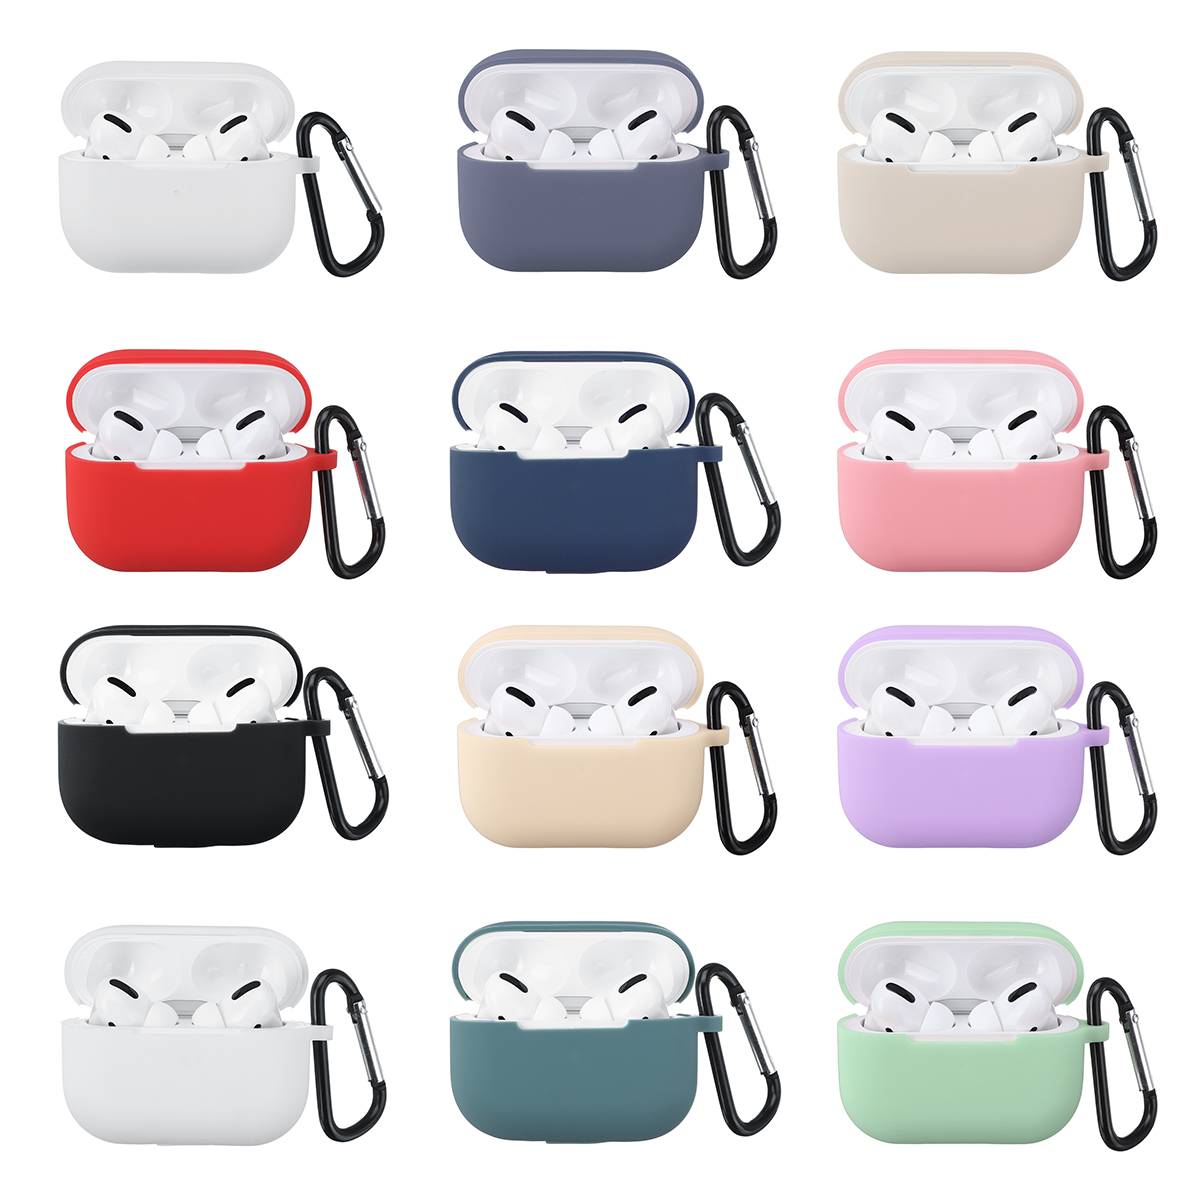 1PCS-Colorful-Soft-Silicone-Protective-Earphone-Storage-Cover-Case-with-Buckle-For-AirPods-Pro-1653049-6